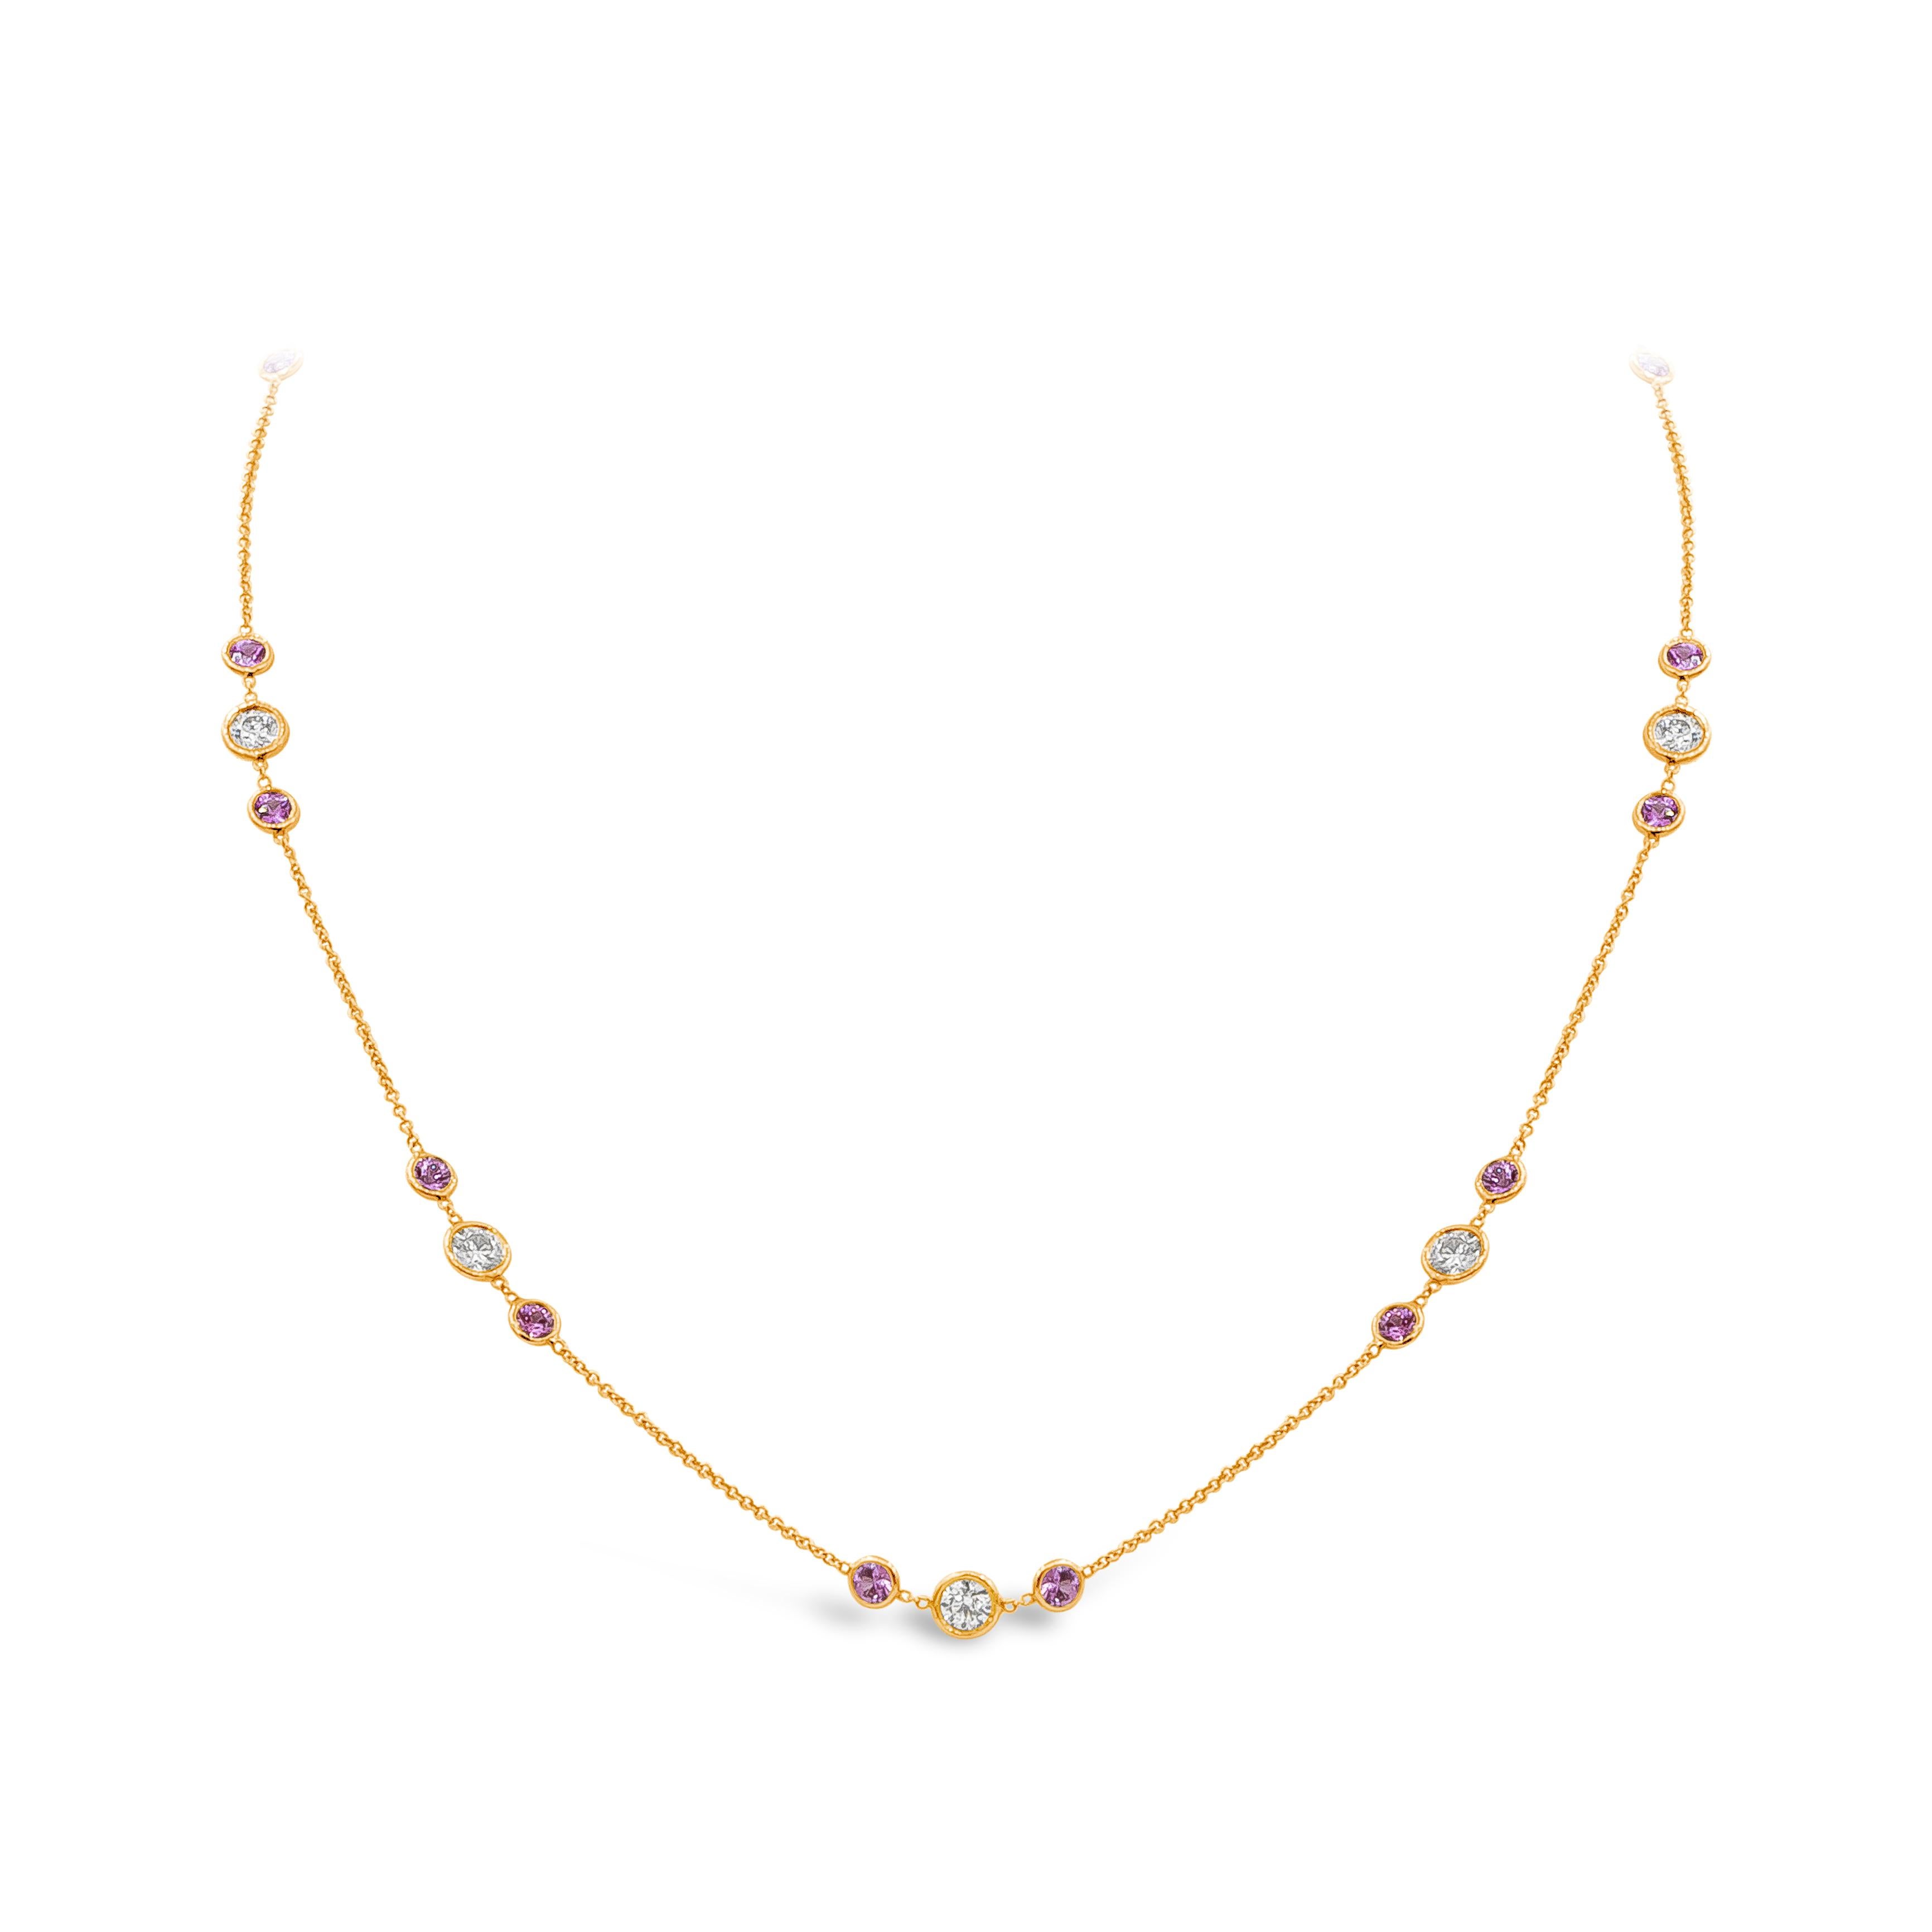 Showcasing round brilliant diamonds, accented by round pink sapphires on either side, spaced evenly in an 18 karat rose gold chain. Approximately 16 inches in length.

Style available in different price ranges. Prices are based on your selection of